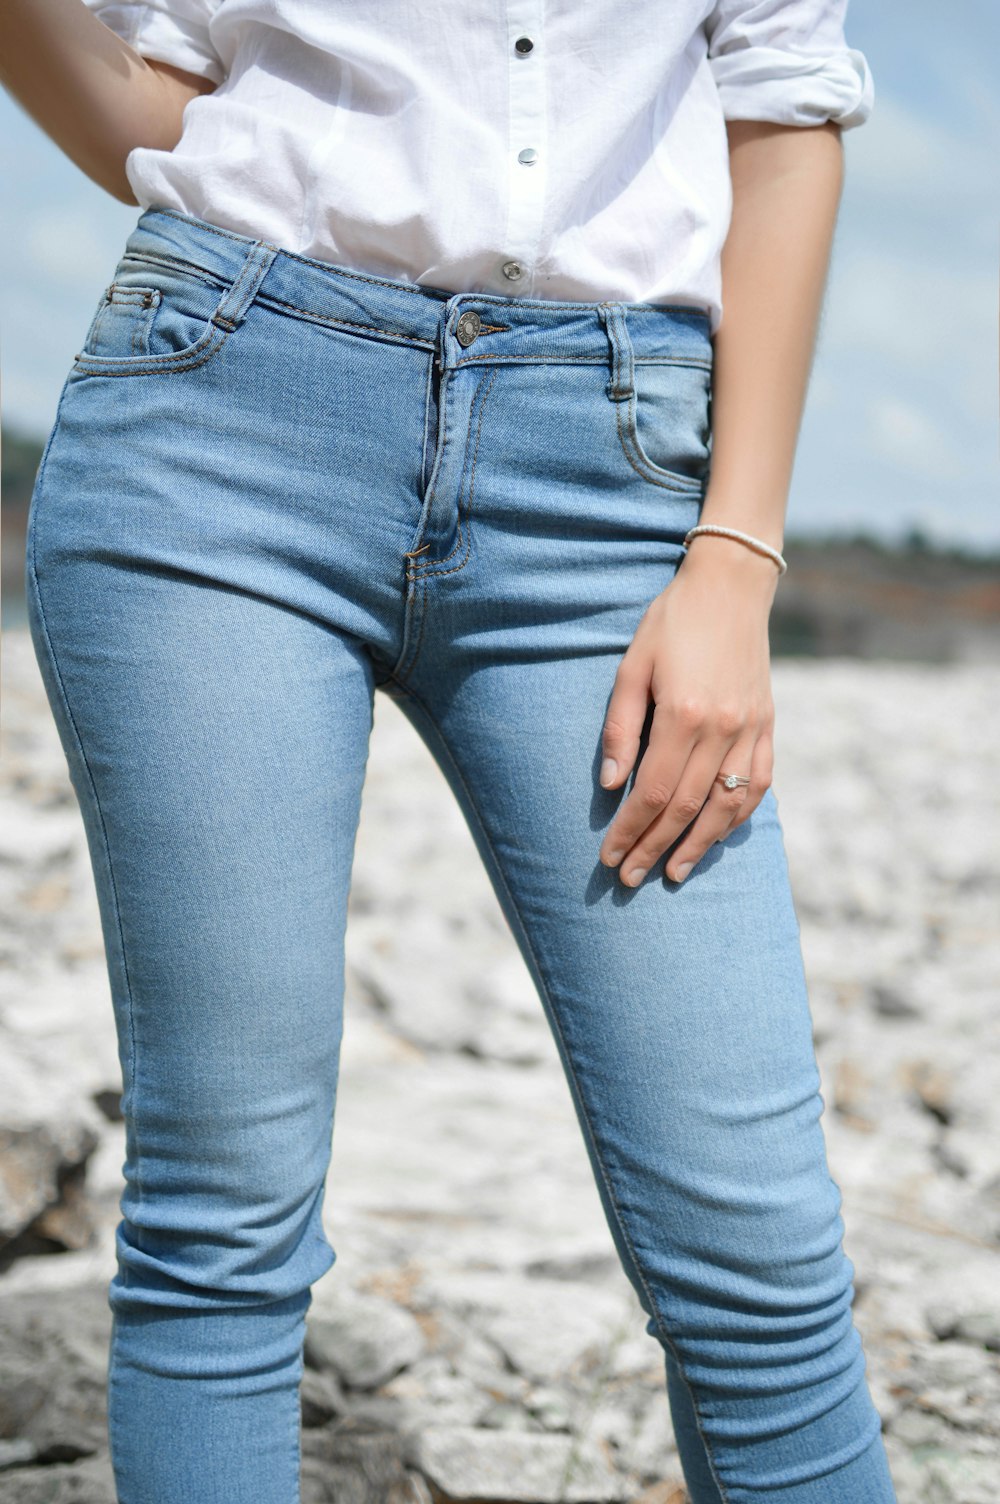 Woman Jeans Pictures | Download Free Images on Unsplash